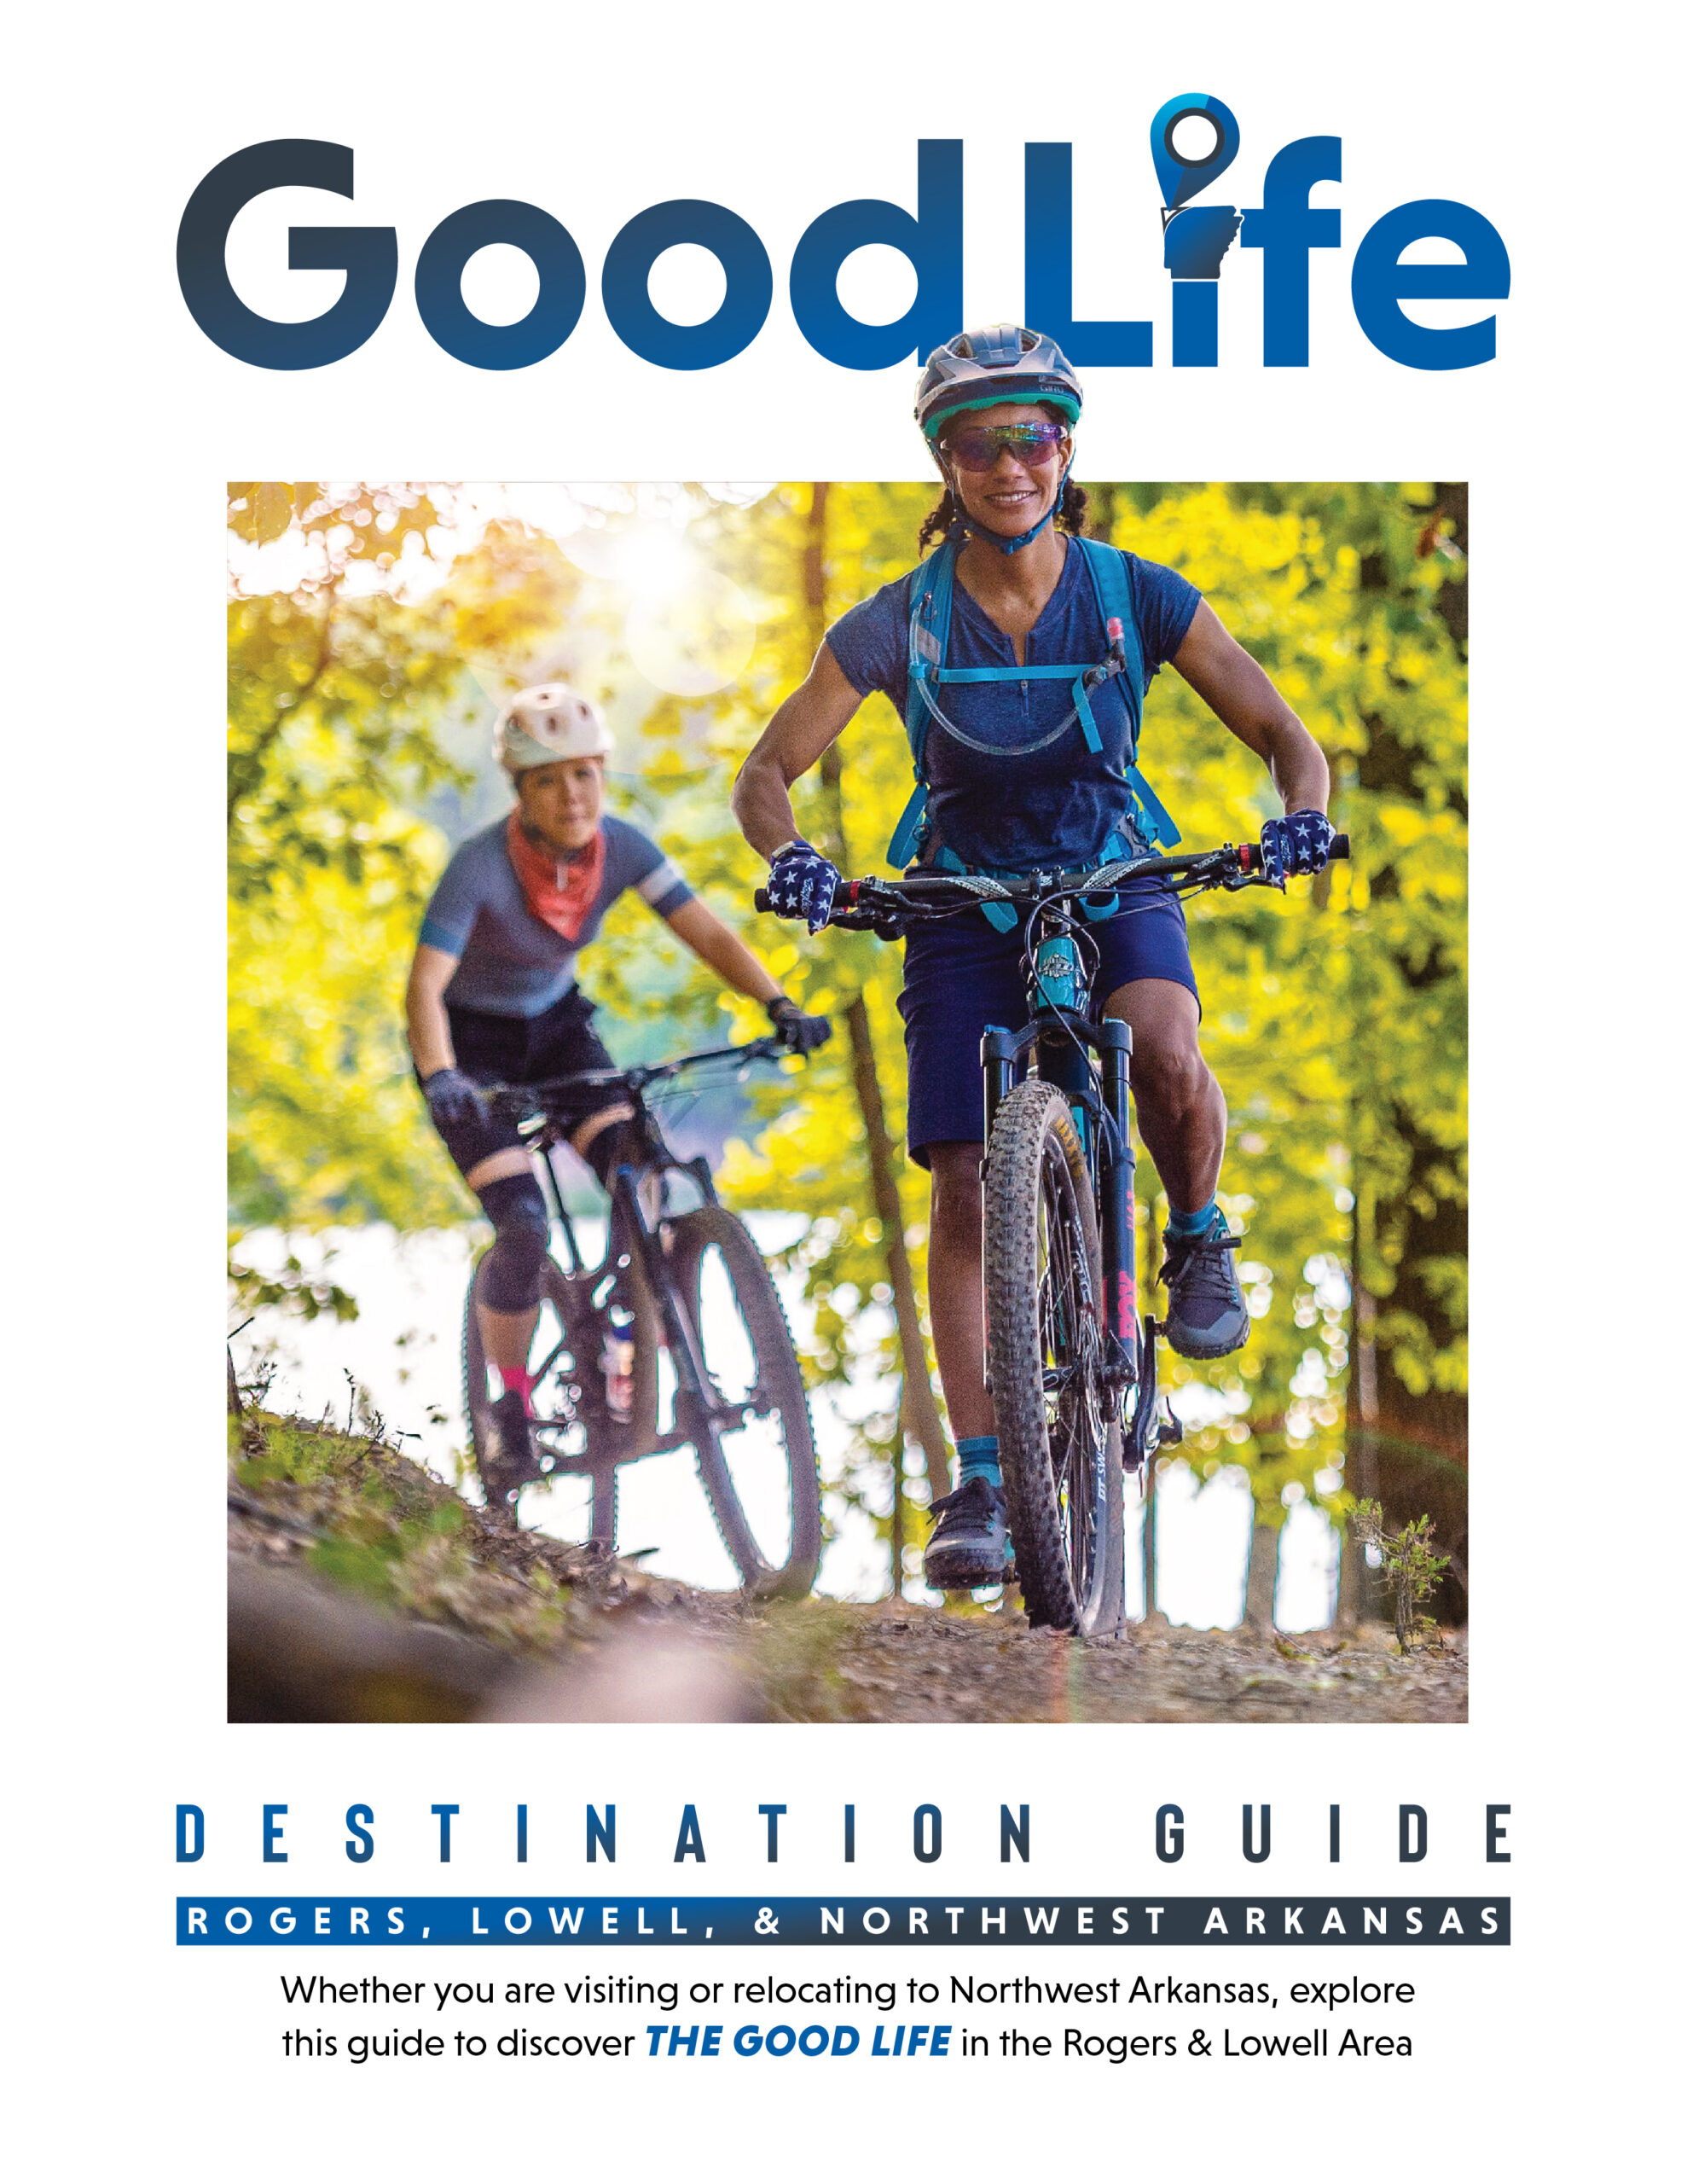 The cover of goodlife magazine with two people riding bikes.